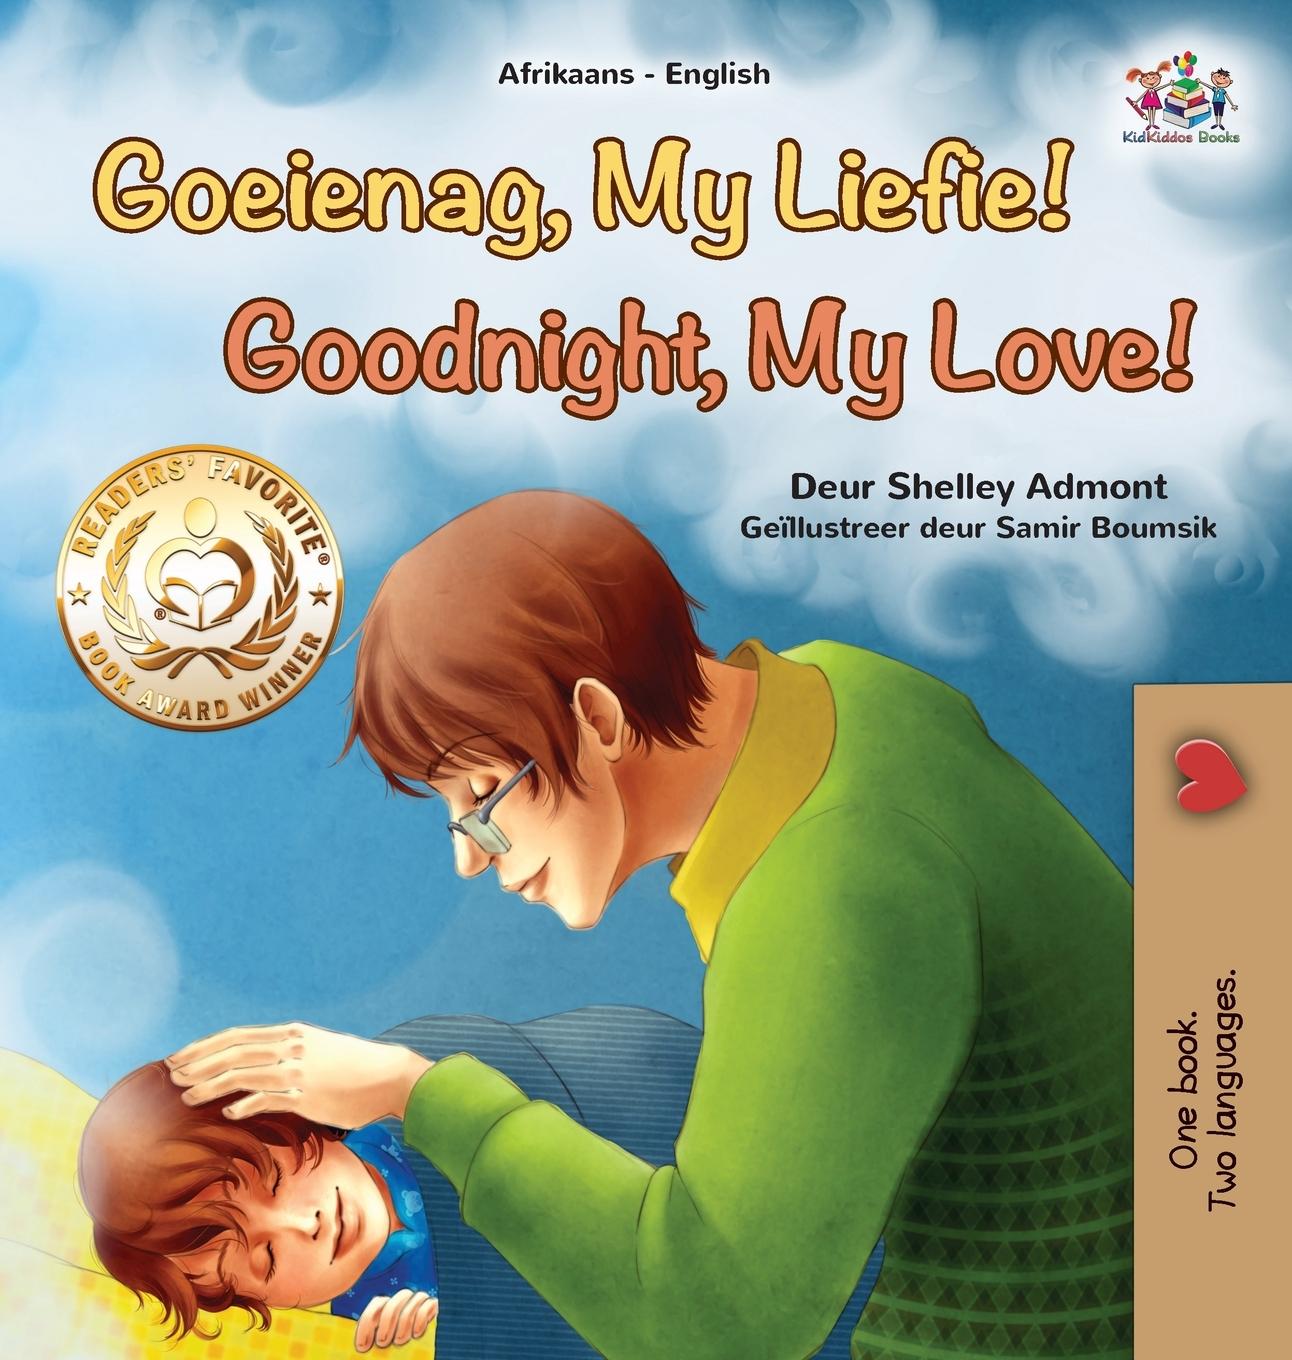 Carte Goodnight, My Love! (Afrikaans English Bilingual Book for Kids) Kidkiddos Books